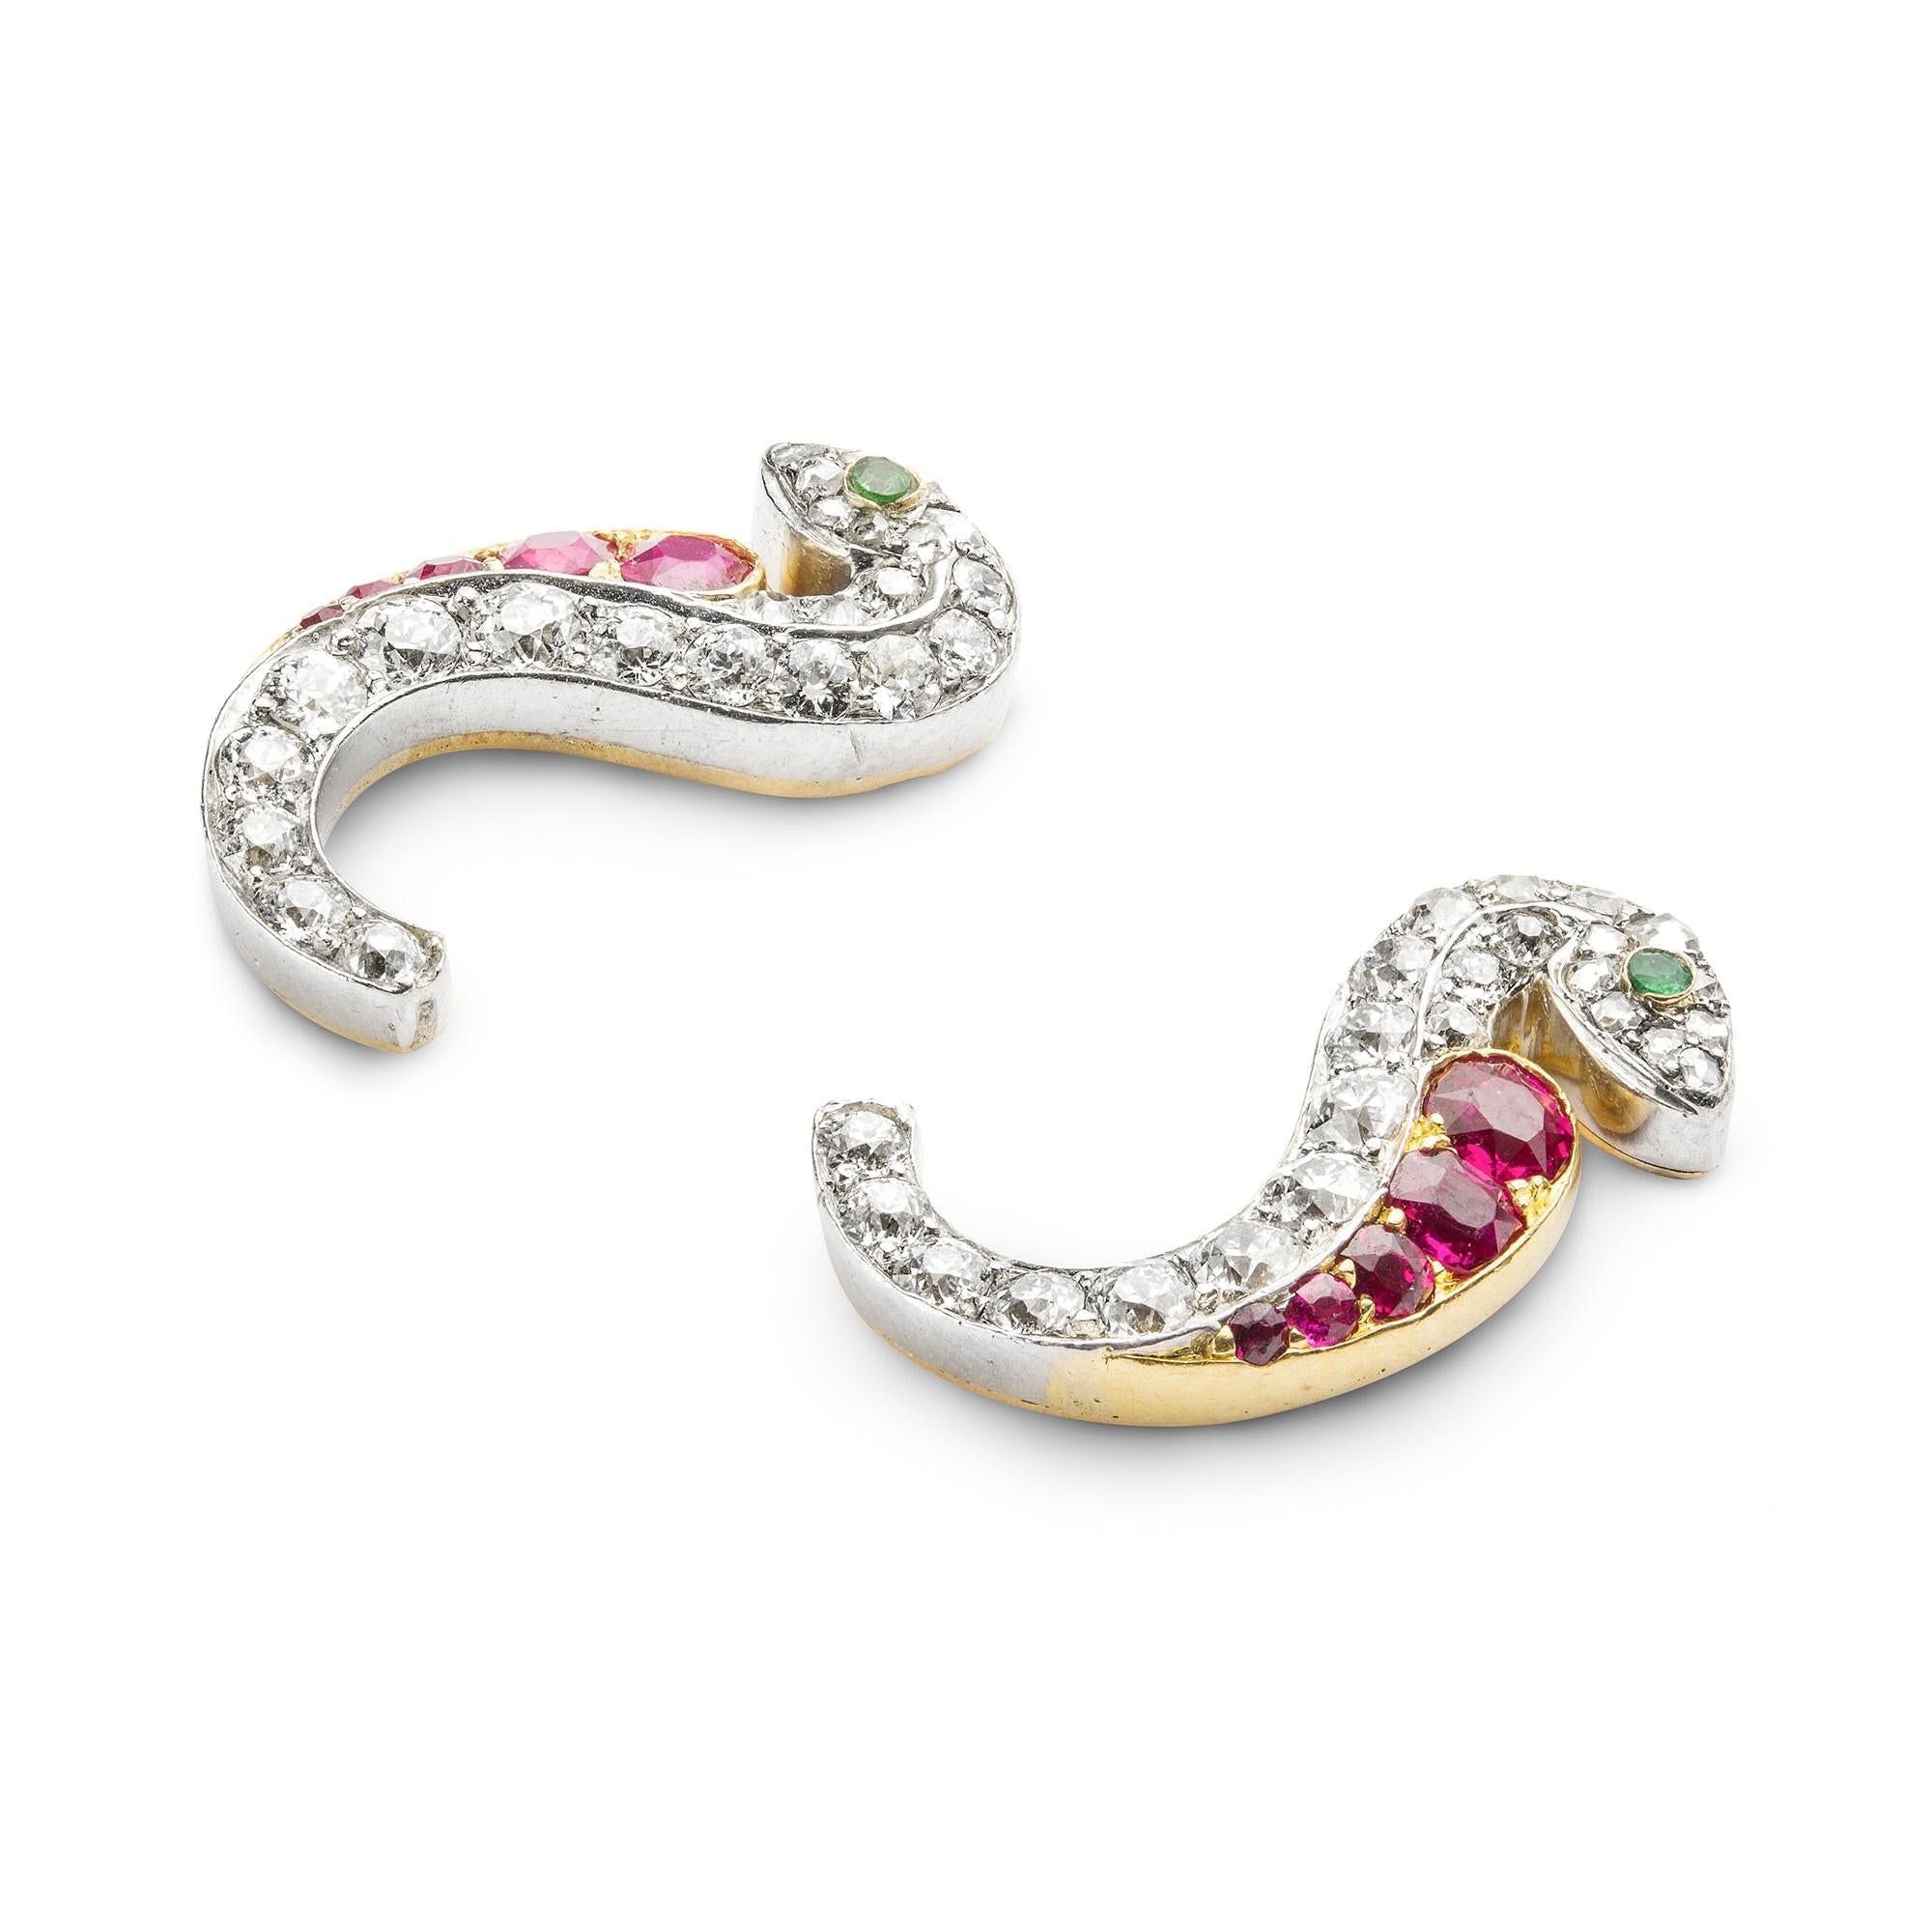 A pair of late Victorian ruby and diamond serpent earrings, encrusted with old-cut diamonds estimated to weigh 1 carat in total, and faceted rubies with estimated total weigh 1 carat, accompanied by GCS Report 5776-3402  stating to be of Burmese